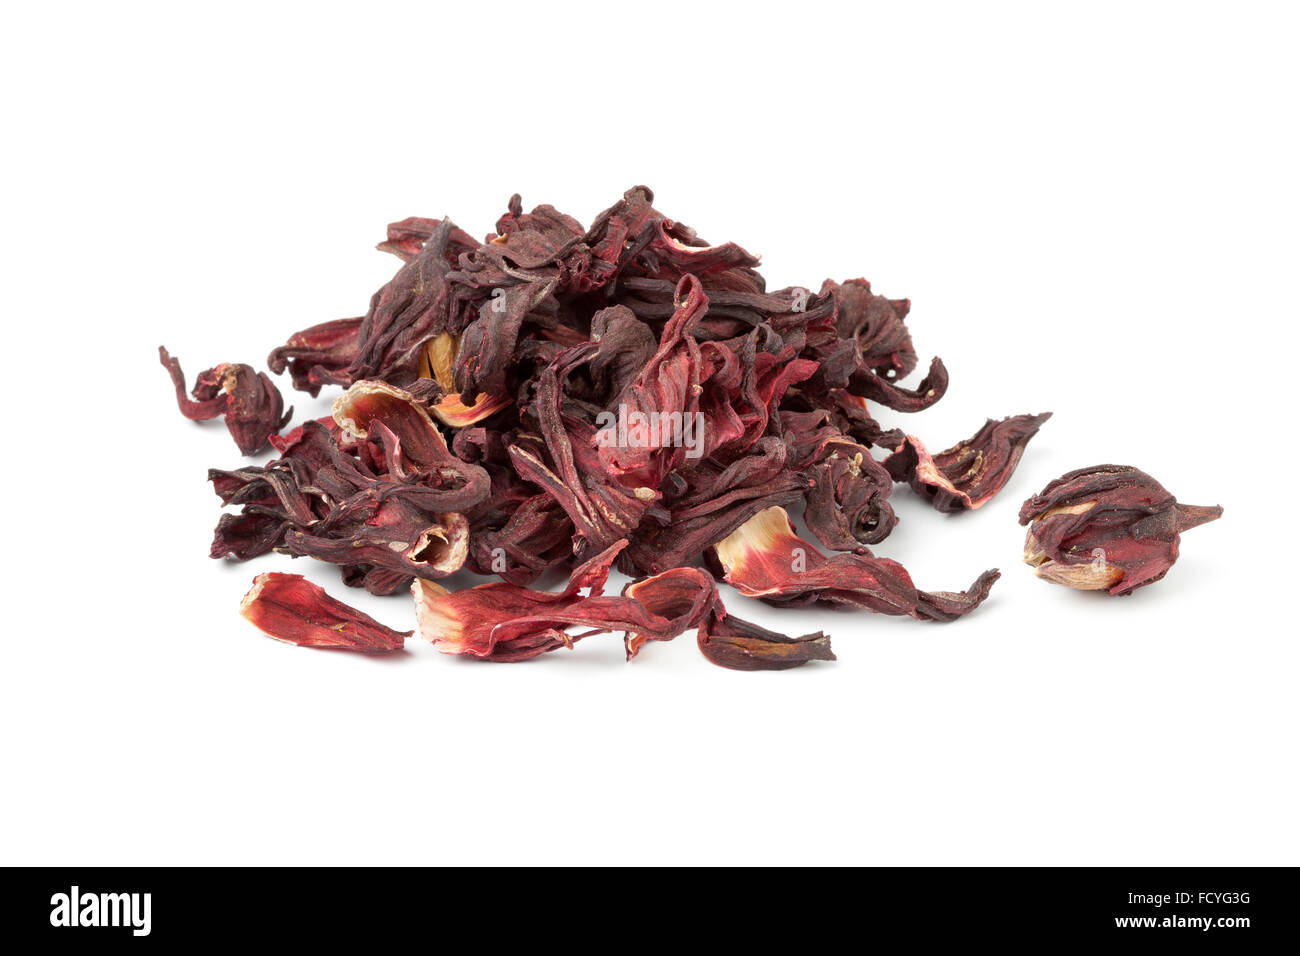 Heap of dried hibiscus flowers on white background Stock Photo